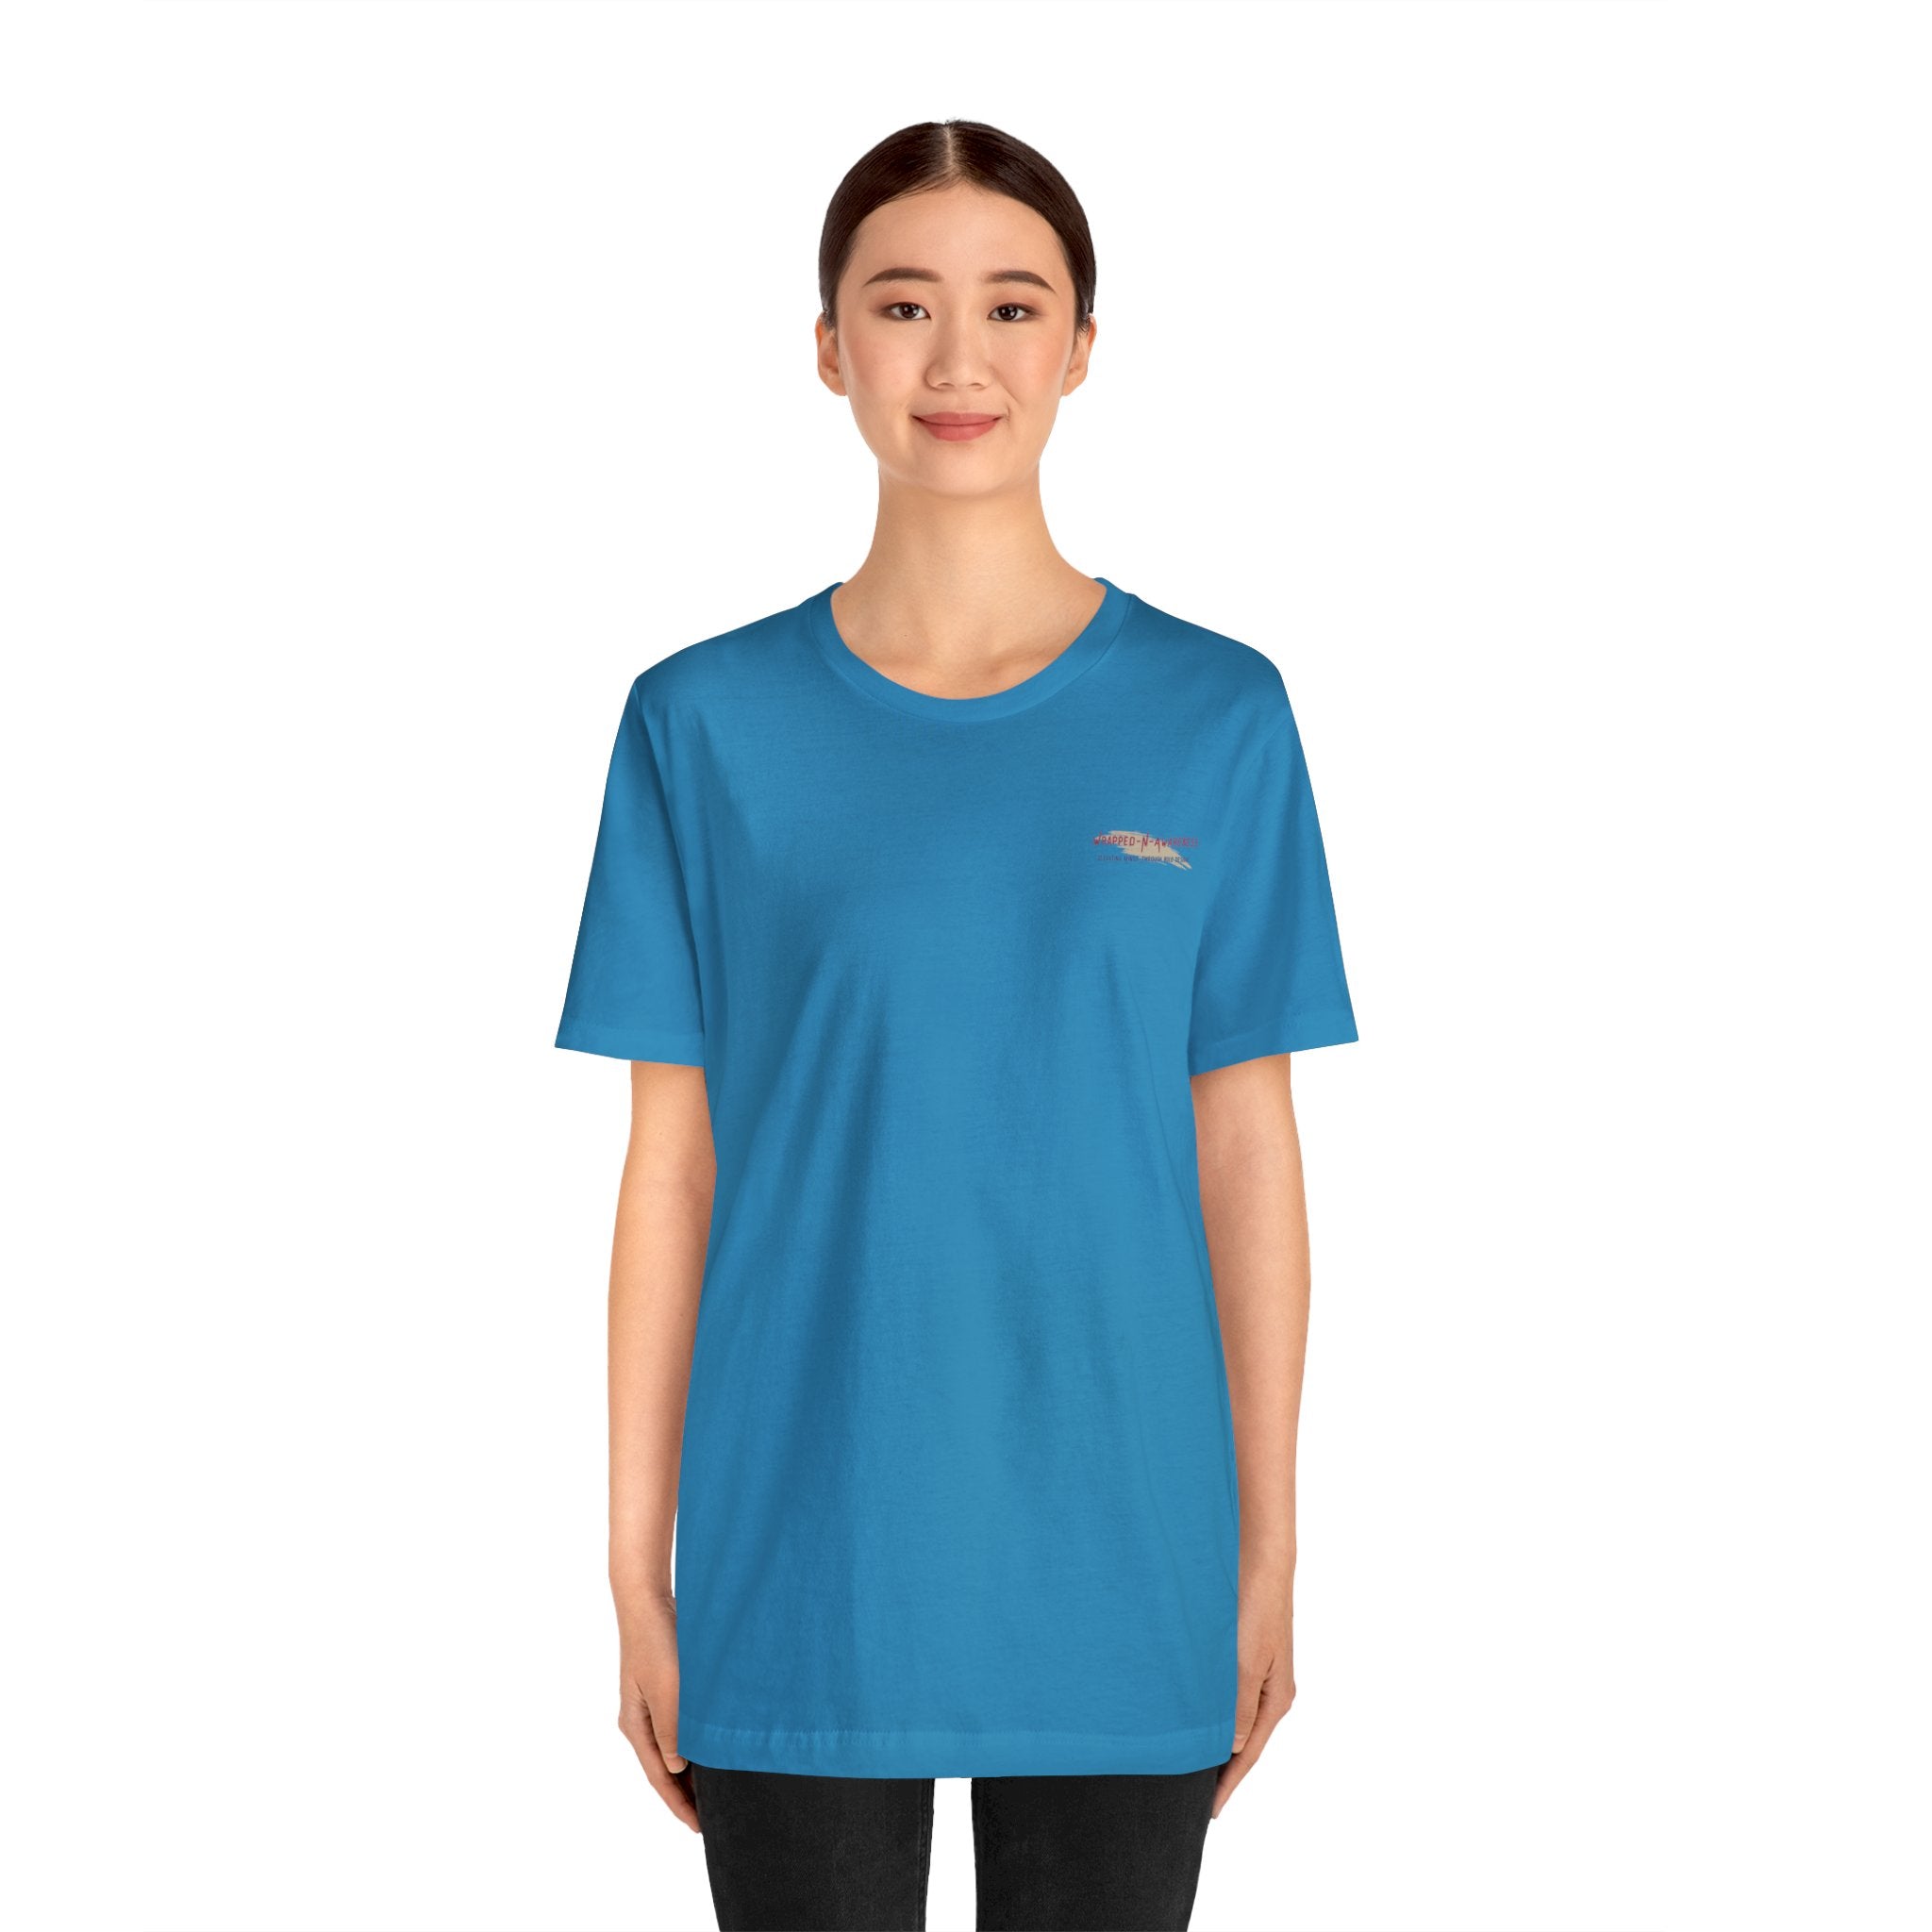 Release Your Mind Jersey Tee - Bella+Canvas 3001 Heather Mauve Airlume Cotton Bella+Canvas 3001 Crew Neckline Jersey Short Sleeve Lightweight Fabric Mental Health Support Retail Fit Tear-away Label Tee Unisex Tee T-Shirt 7561672845943607662_2048 Printify